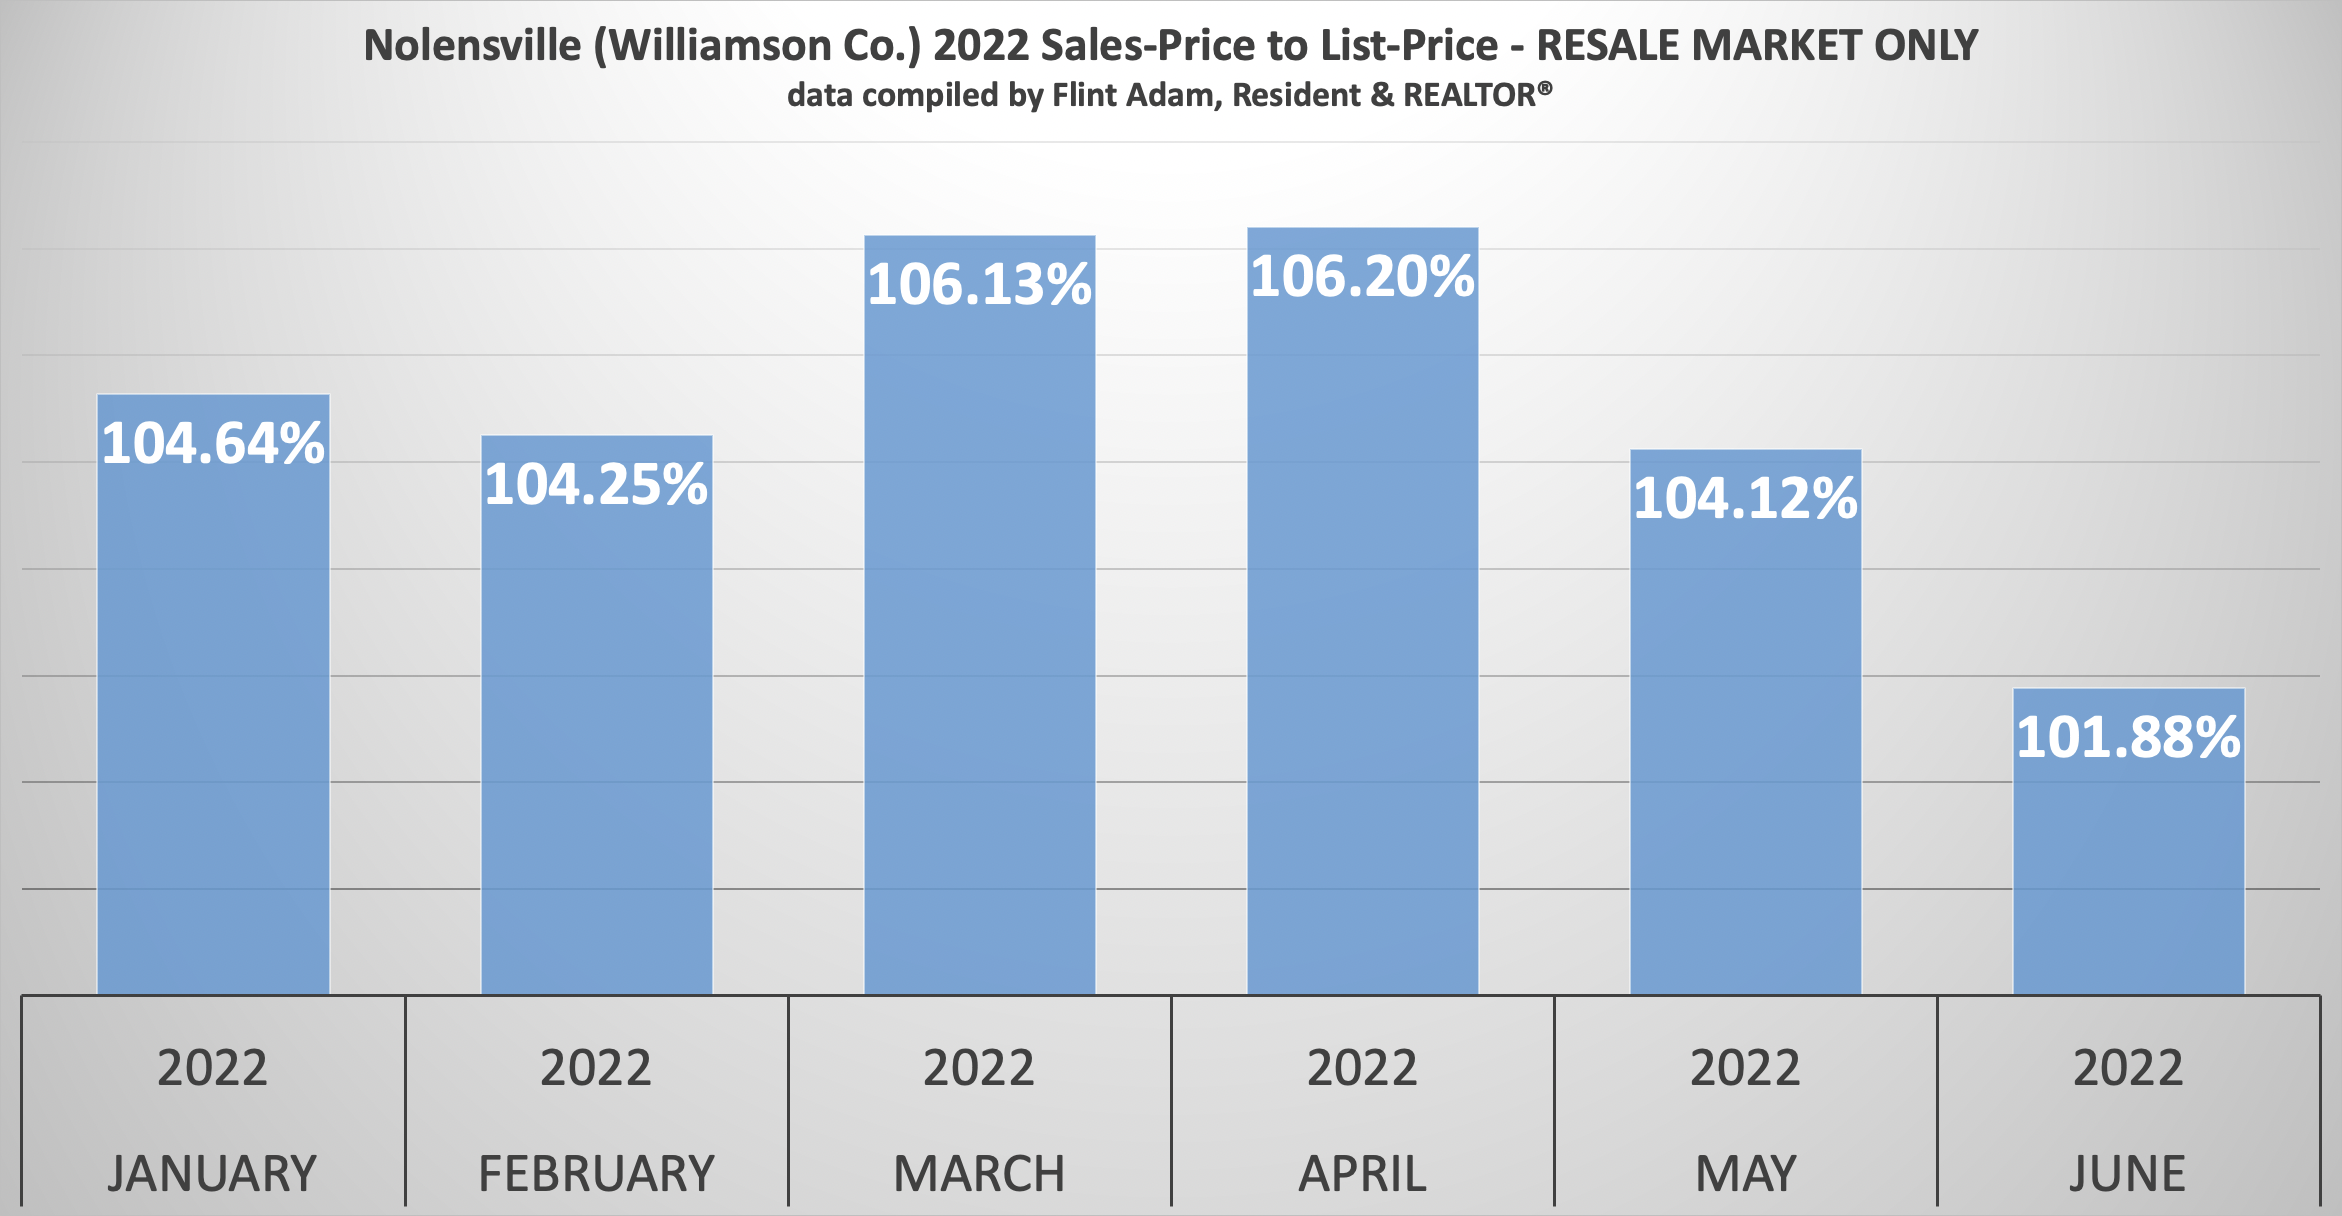 Nolensville TN (Williamson Co.) Sales Price to List Price Ratios for the Existing Homes Market - January through June 2022